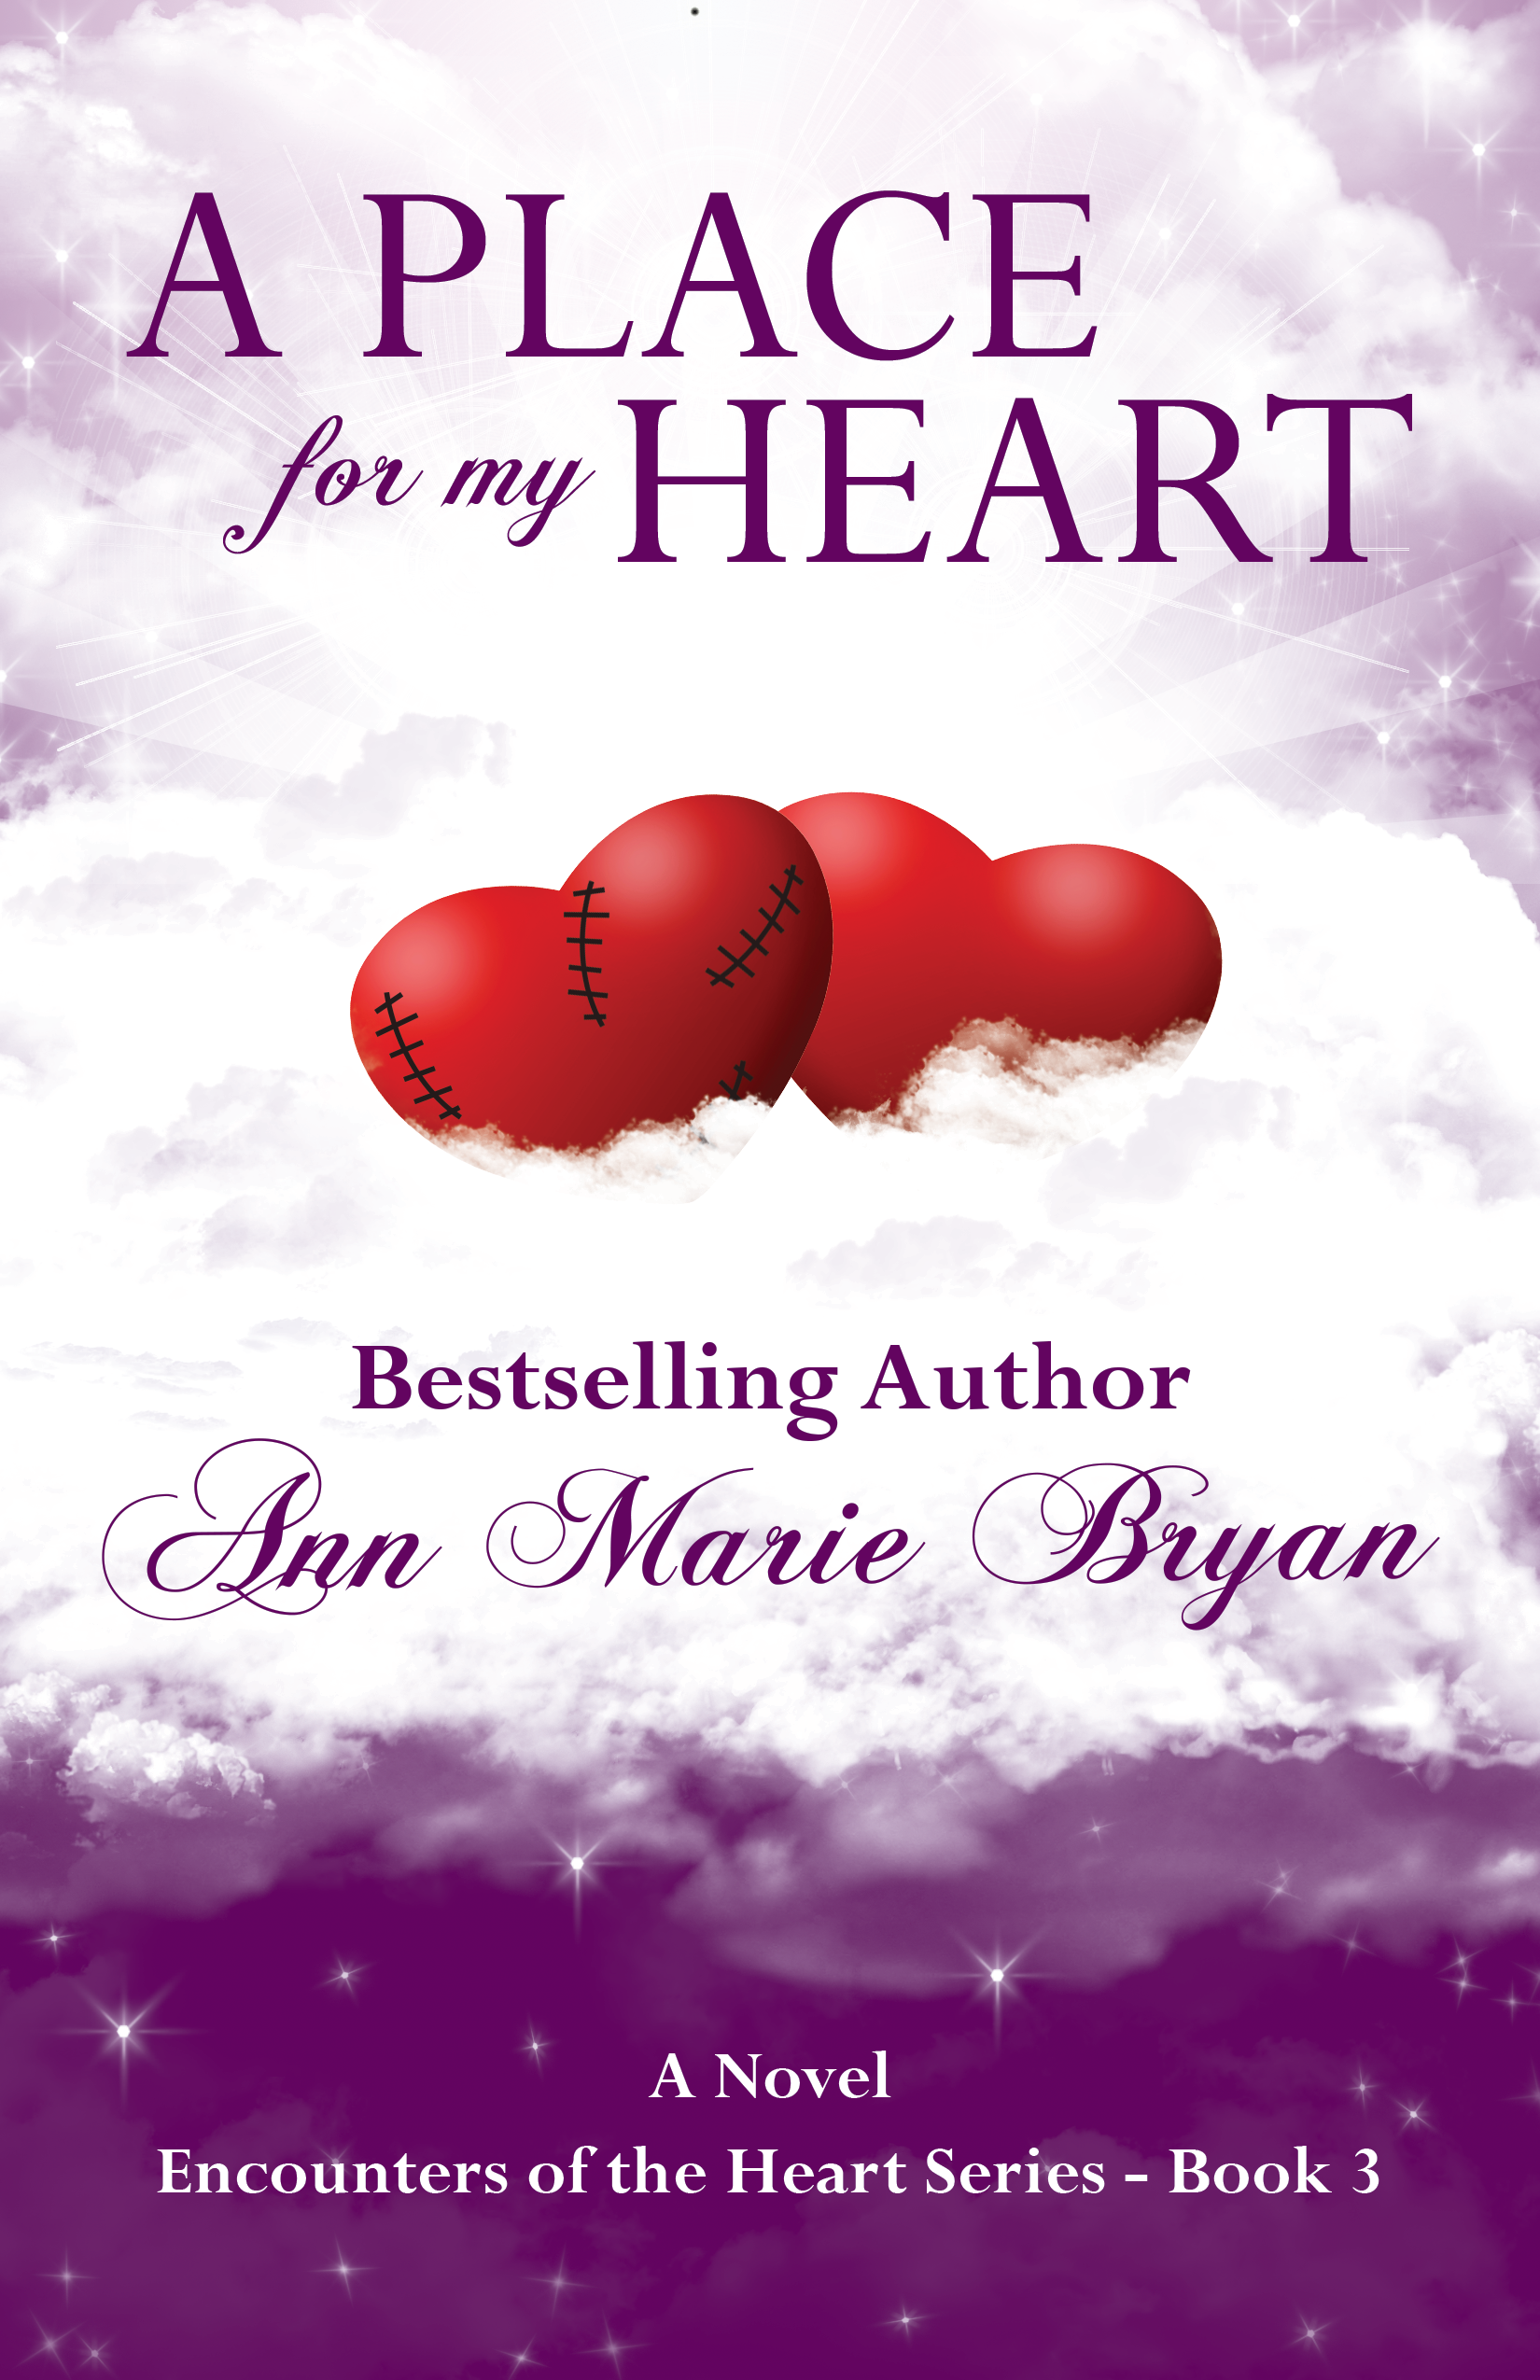 FREE: A Place For My Heart by Ann Marie Bryan